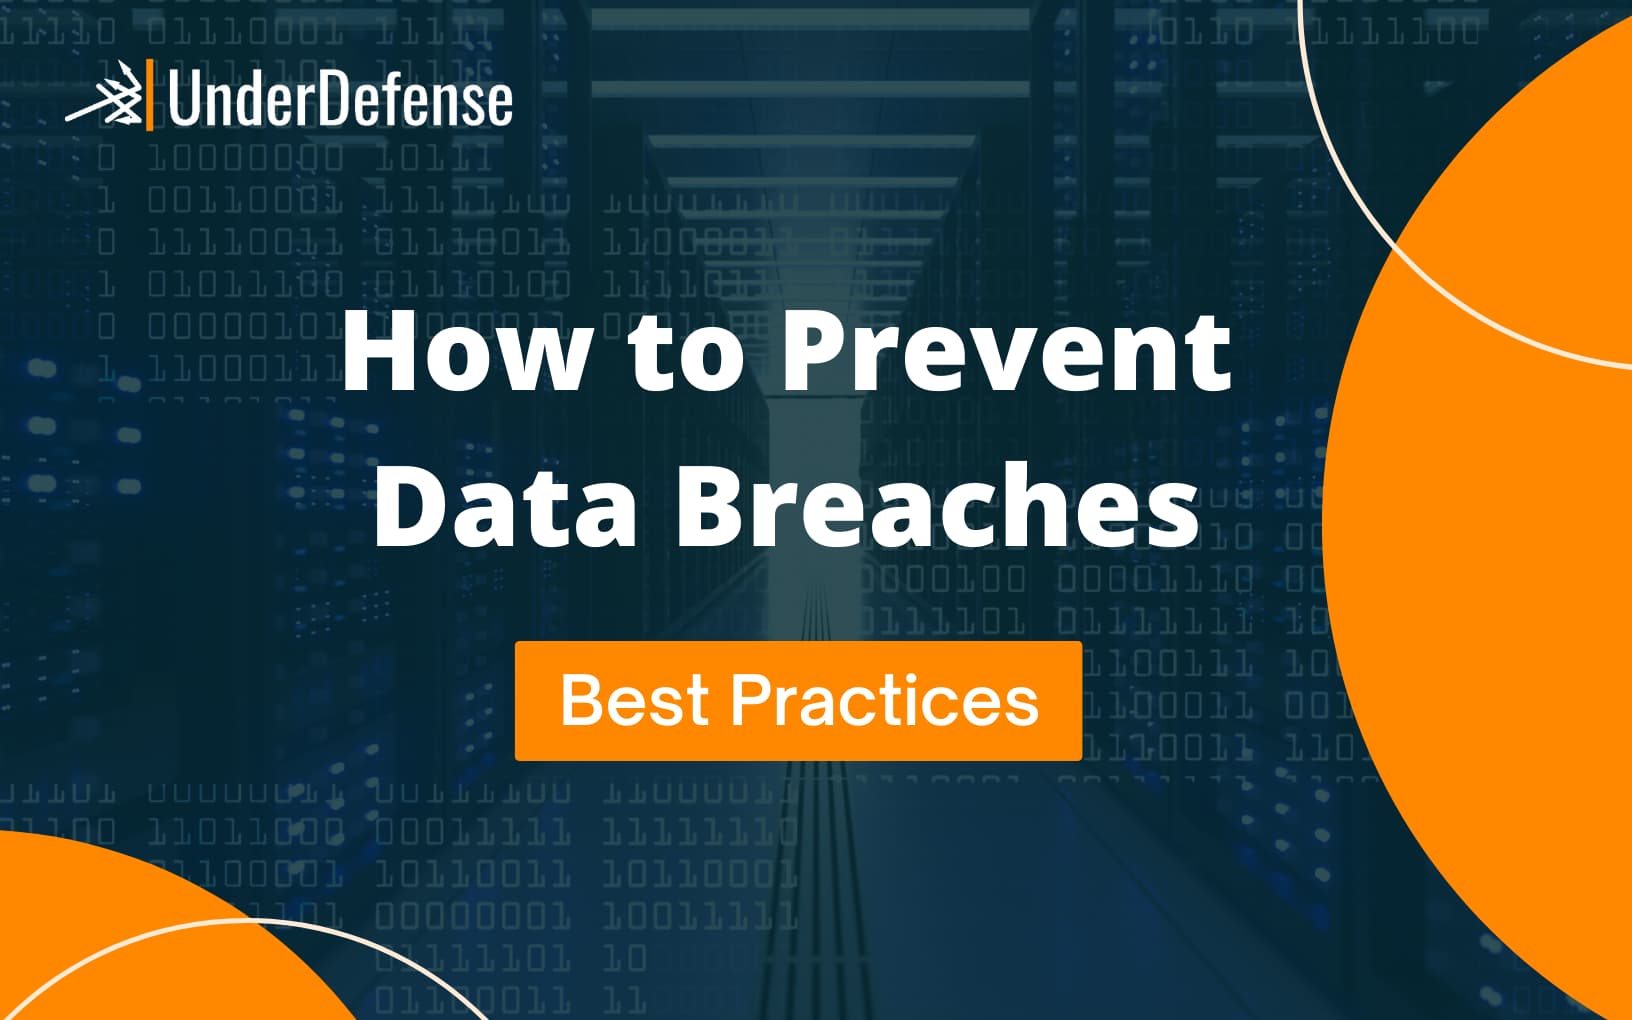 How to Fortify Your Defenses Against Data Breaches - Due